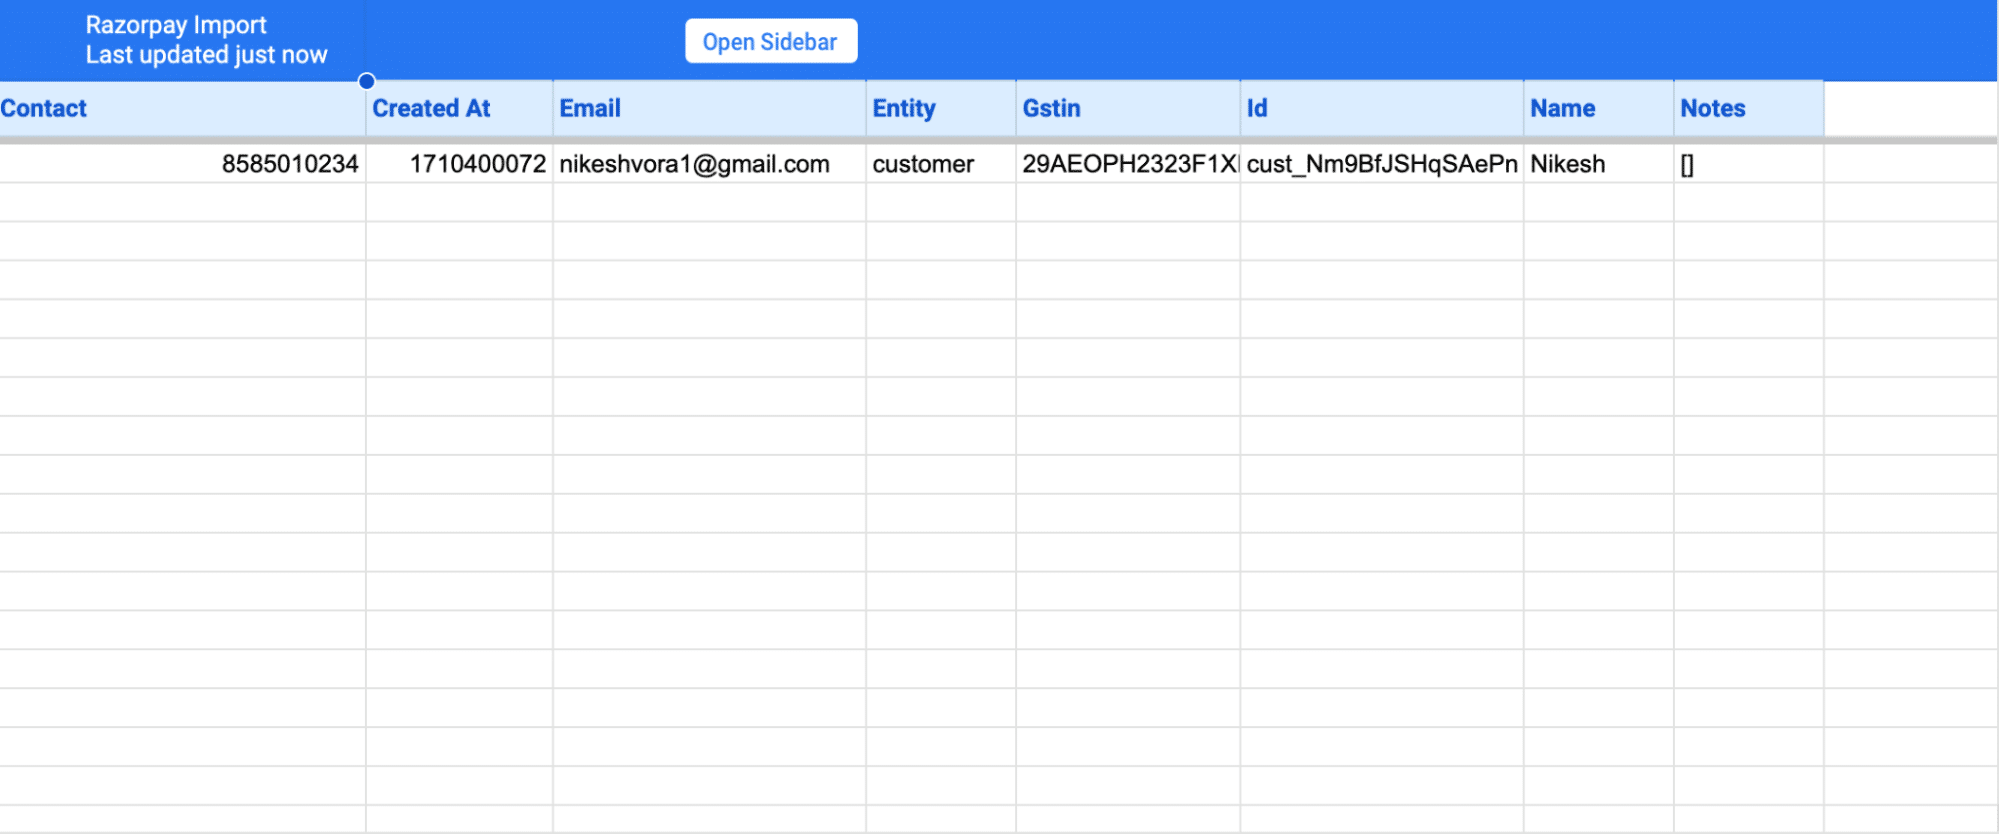 Finalizing import settings by clicking 'Import' to populate the spreadsheet with Razorpay data rapidly.